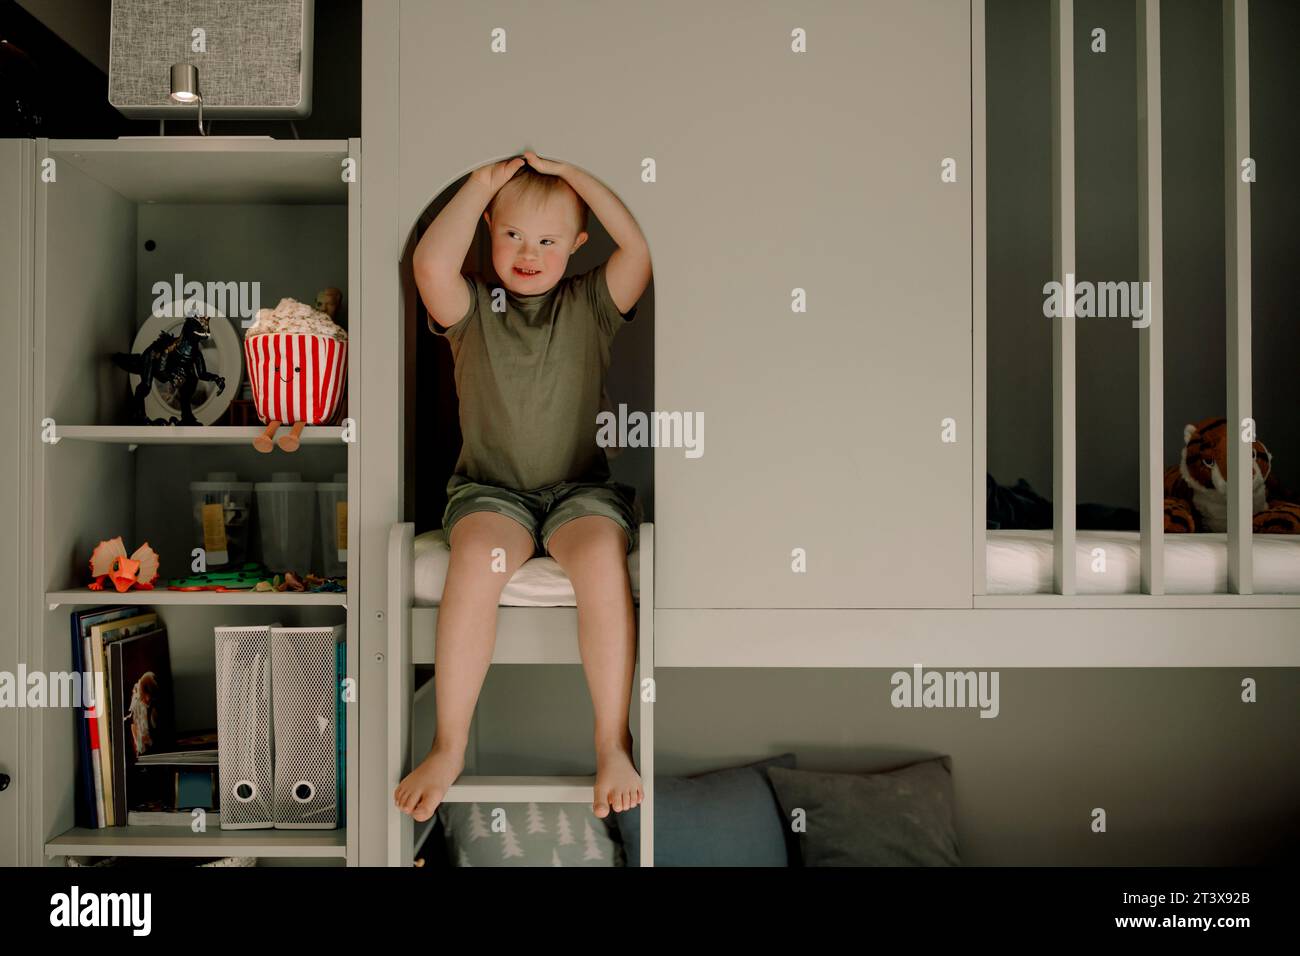 Full length of boy with down syndrome sitting on bunkbed ladder at home Stock Photo